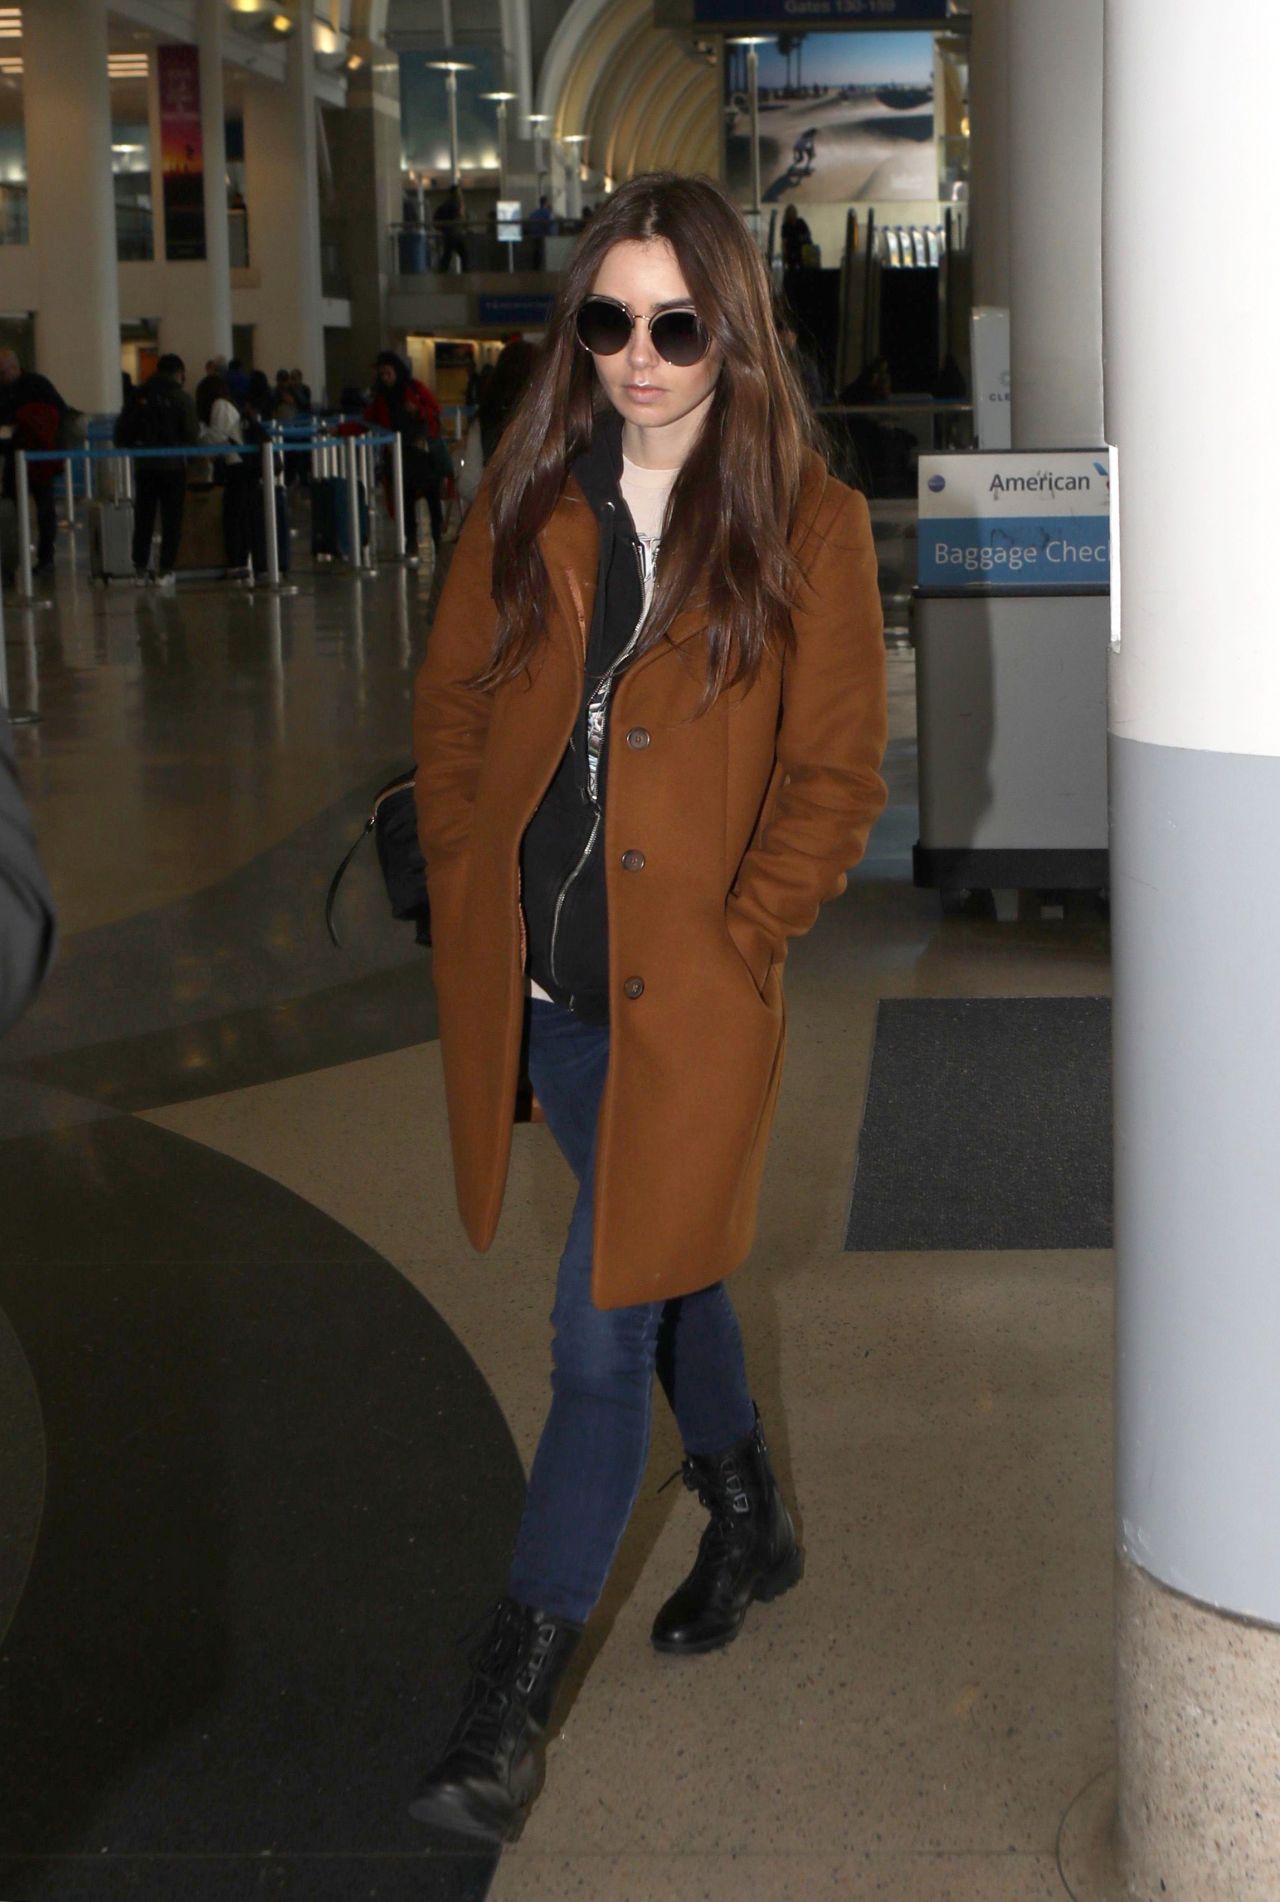 Lily Collins in Travel Outfit - LAX Airport 02/27/2019 • CelebMafia